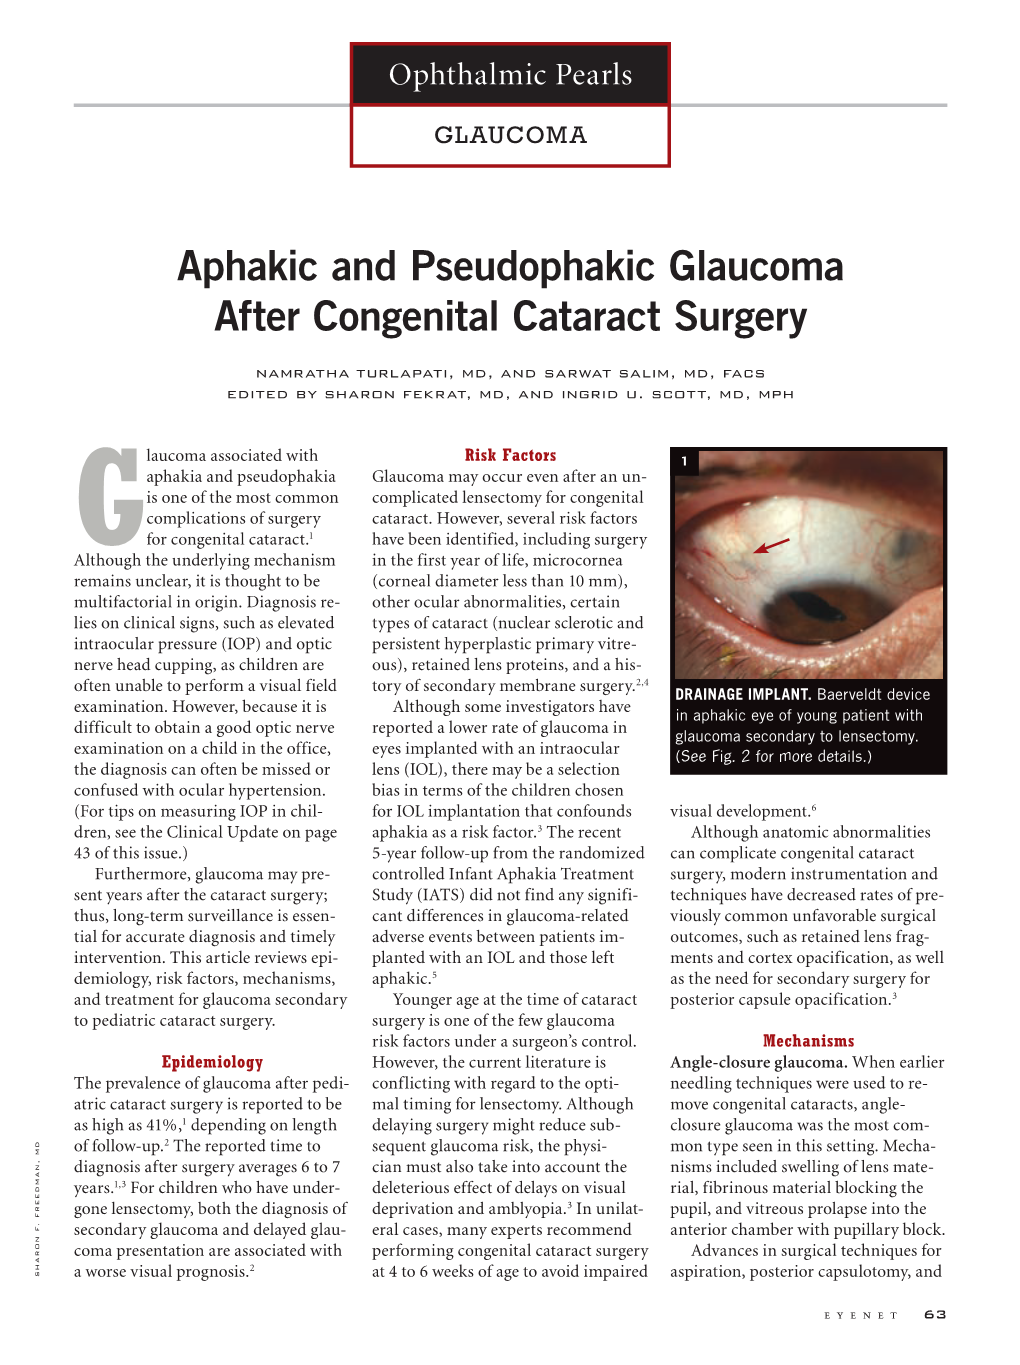 Aphakic and Pseudophakic Glaucoma After Congenital Cataract Surgery